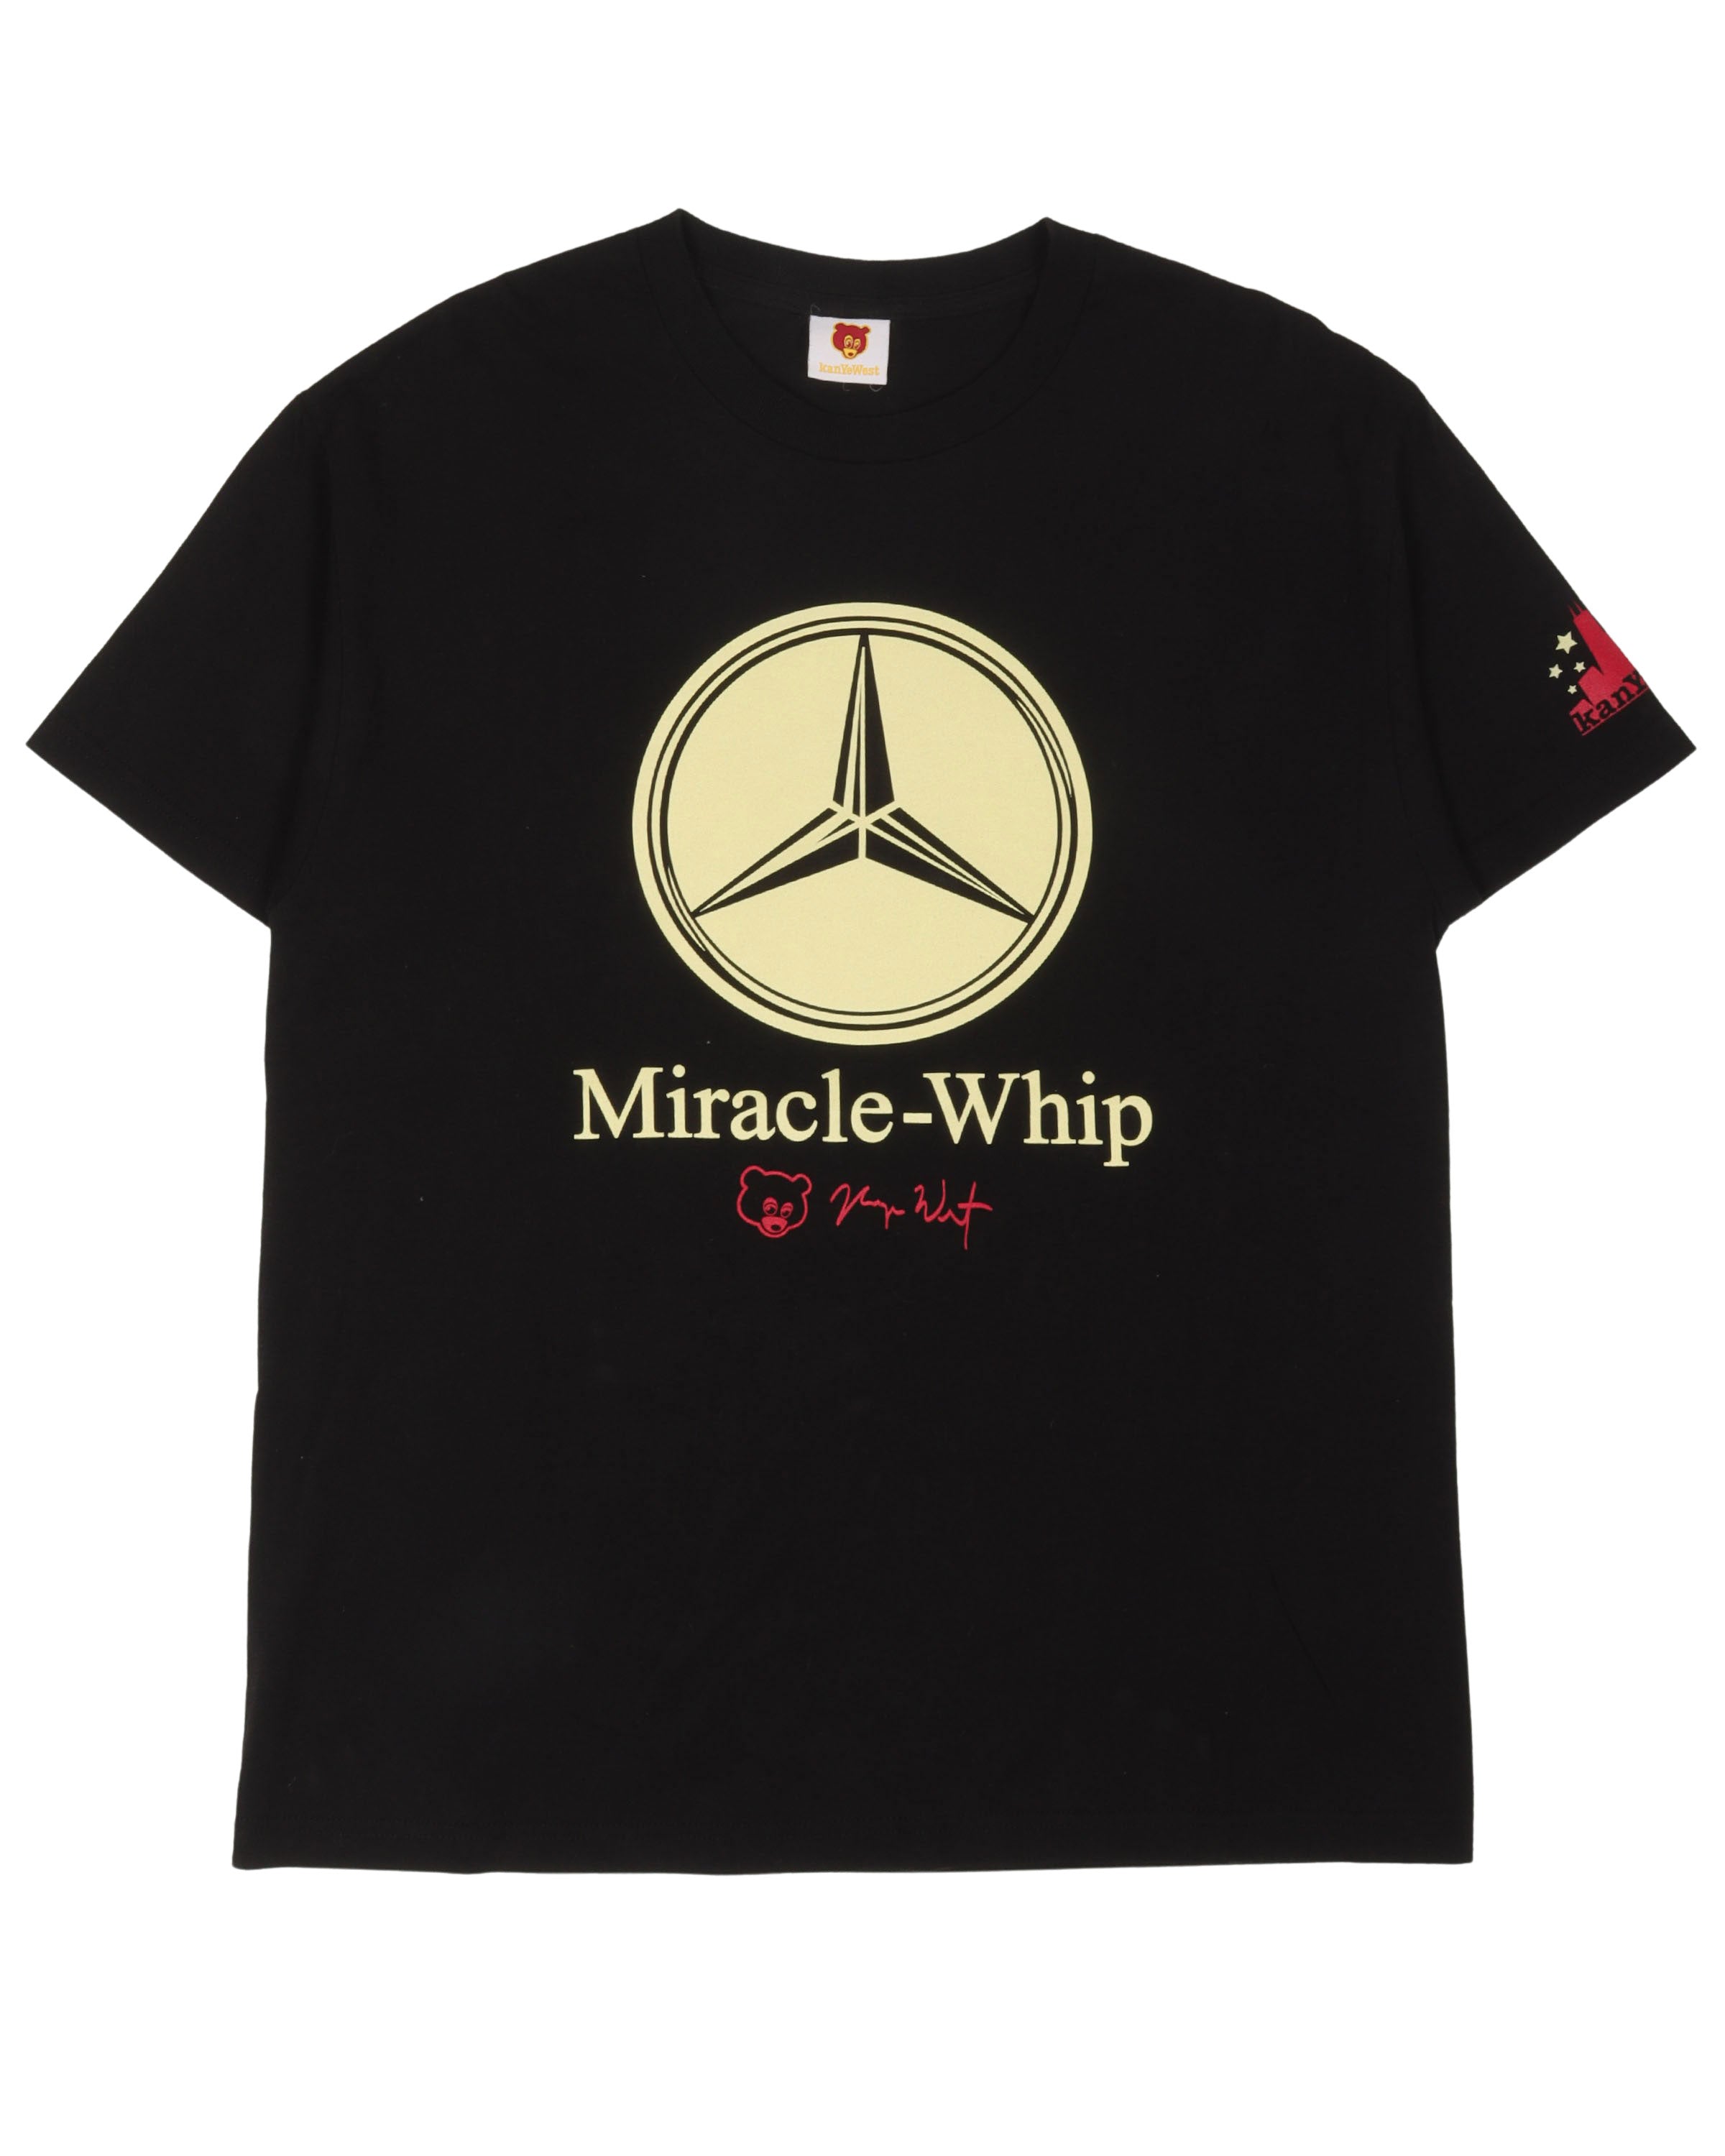 Kanye West Miracle Whip Merch T-Shirt